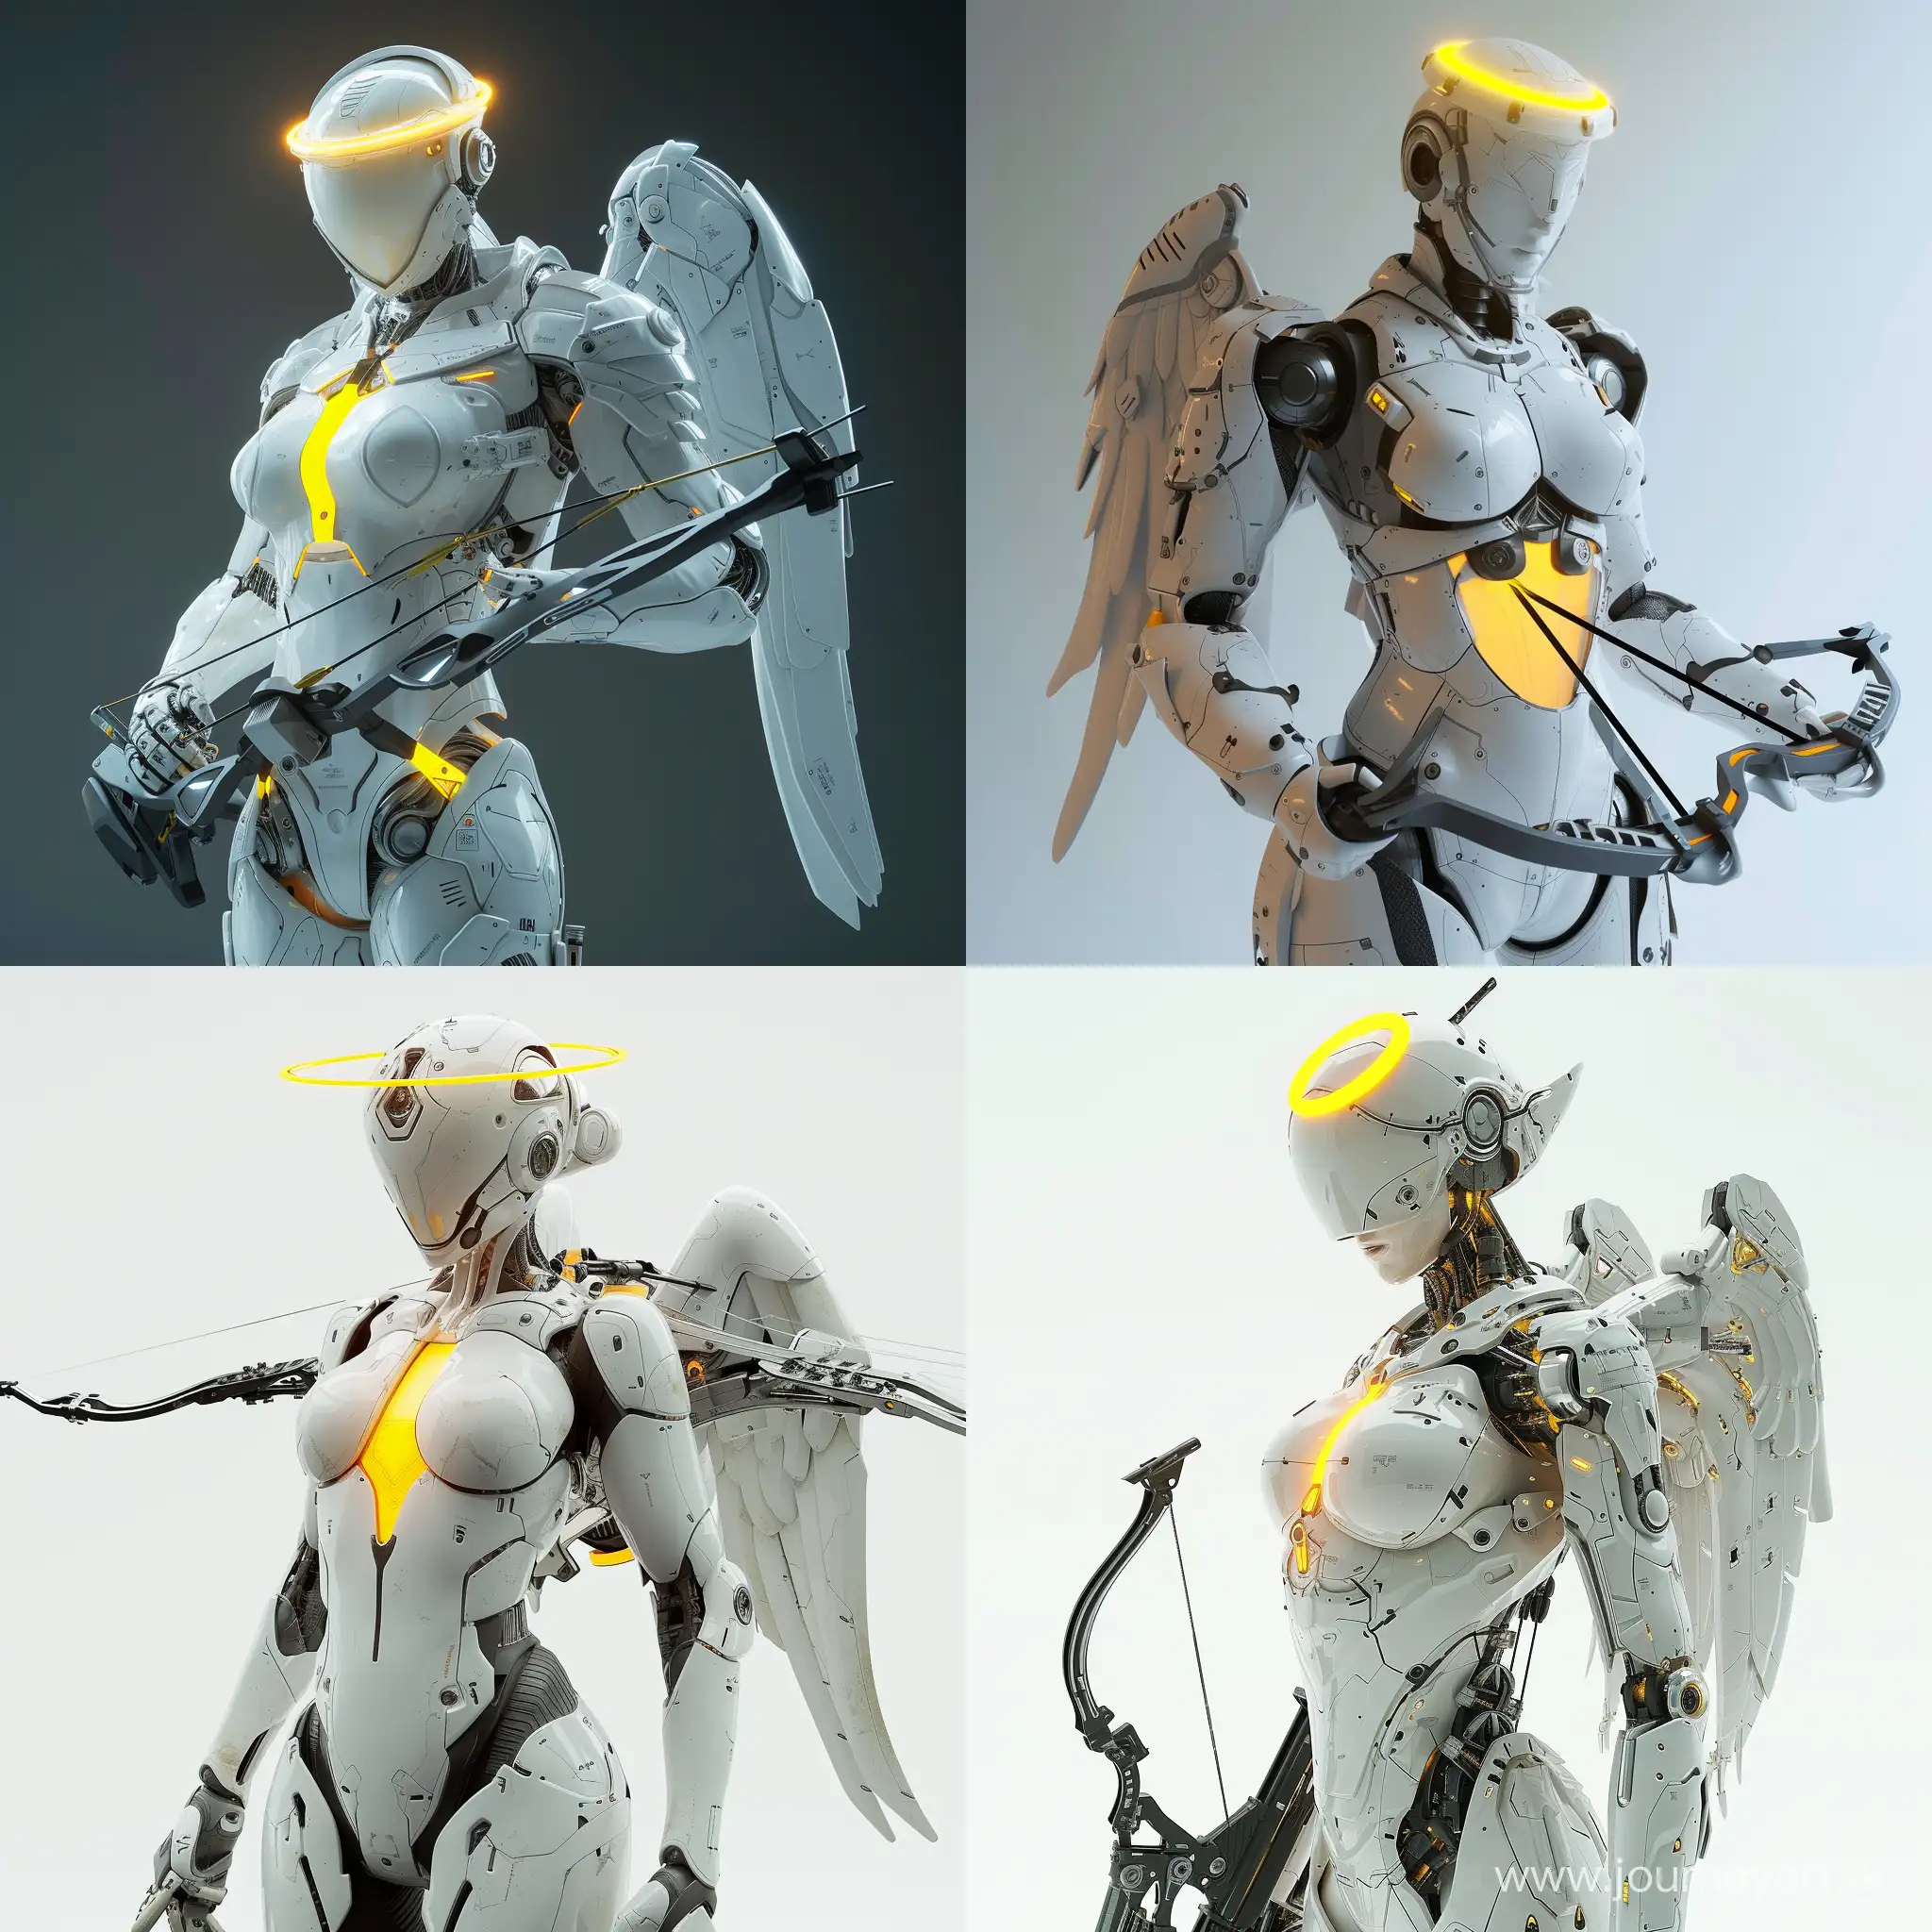 Futuristic-Angelic-Cyborg-Warrior-with-Halo-and-Crossbow